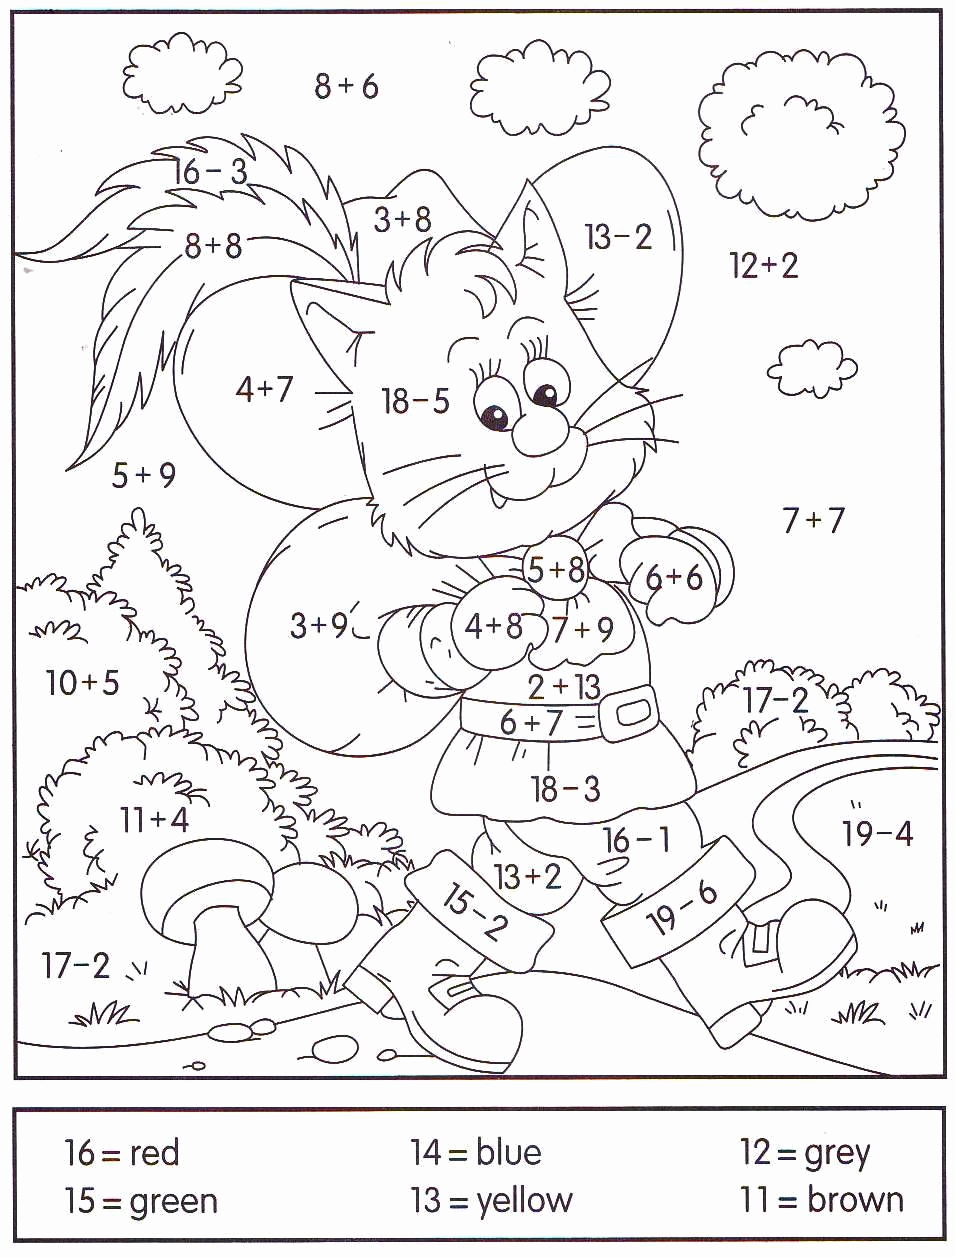 Math Coloring Worksheets 7th Grade Best Of Math Coloring Pages 7th Grade 03 Math Pinterest